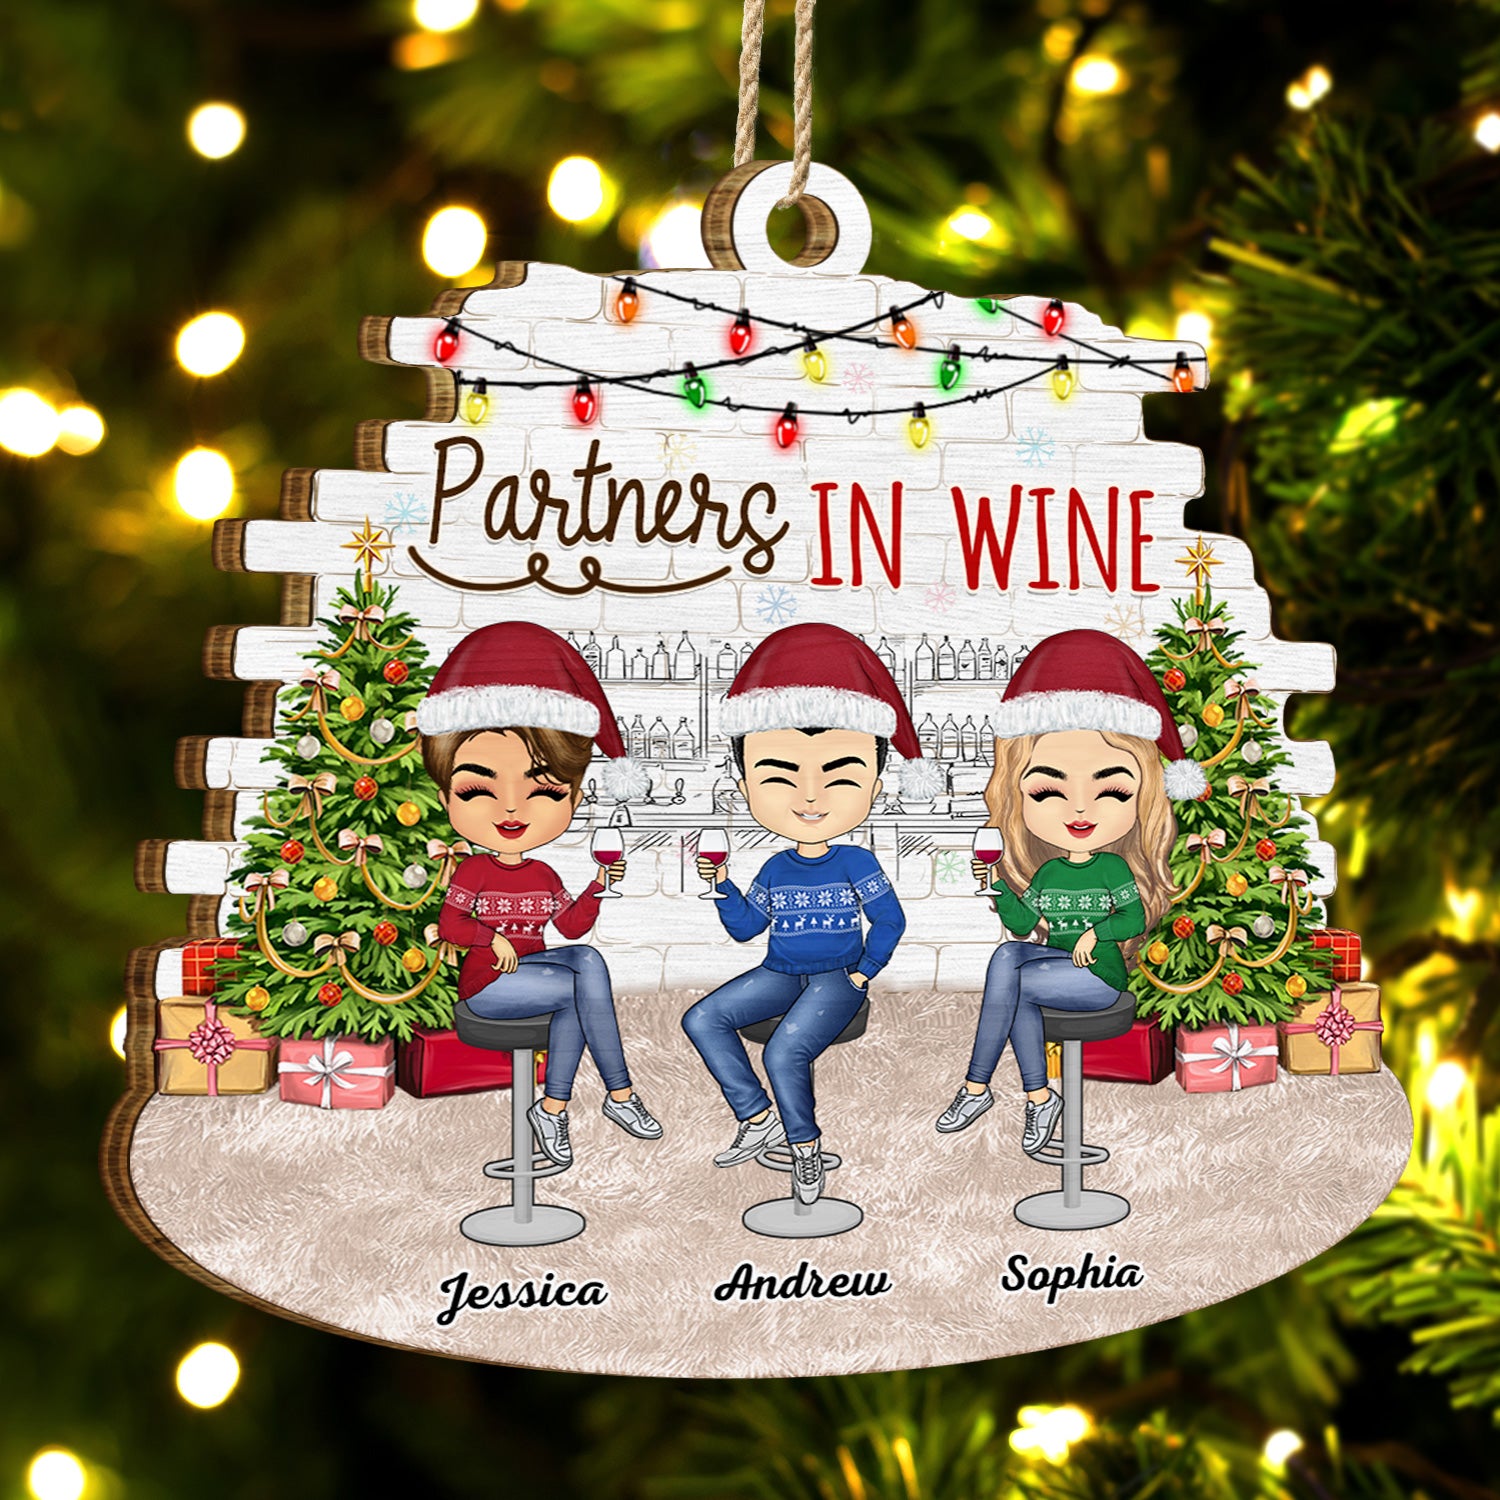 Partners In Wine - Christmas Gift For Besties, BFF Best Friends, Siblings, Sisters, Brothers - Personalized Custom Shaped Wooden Ornament